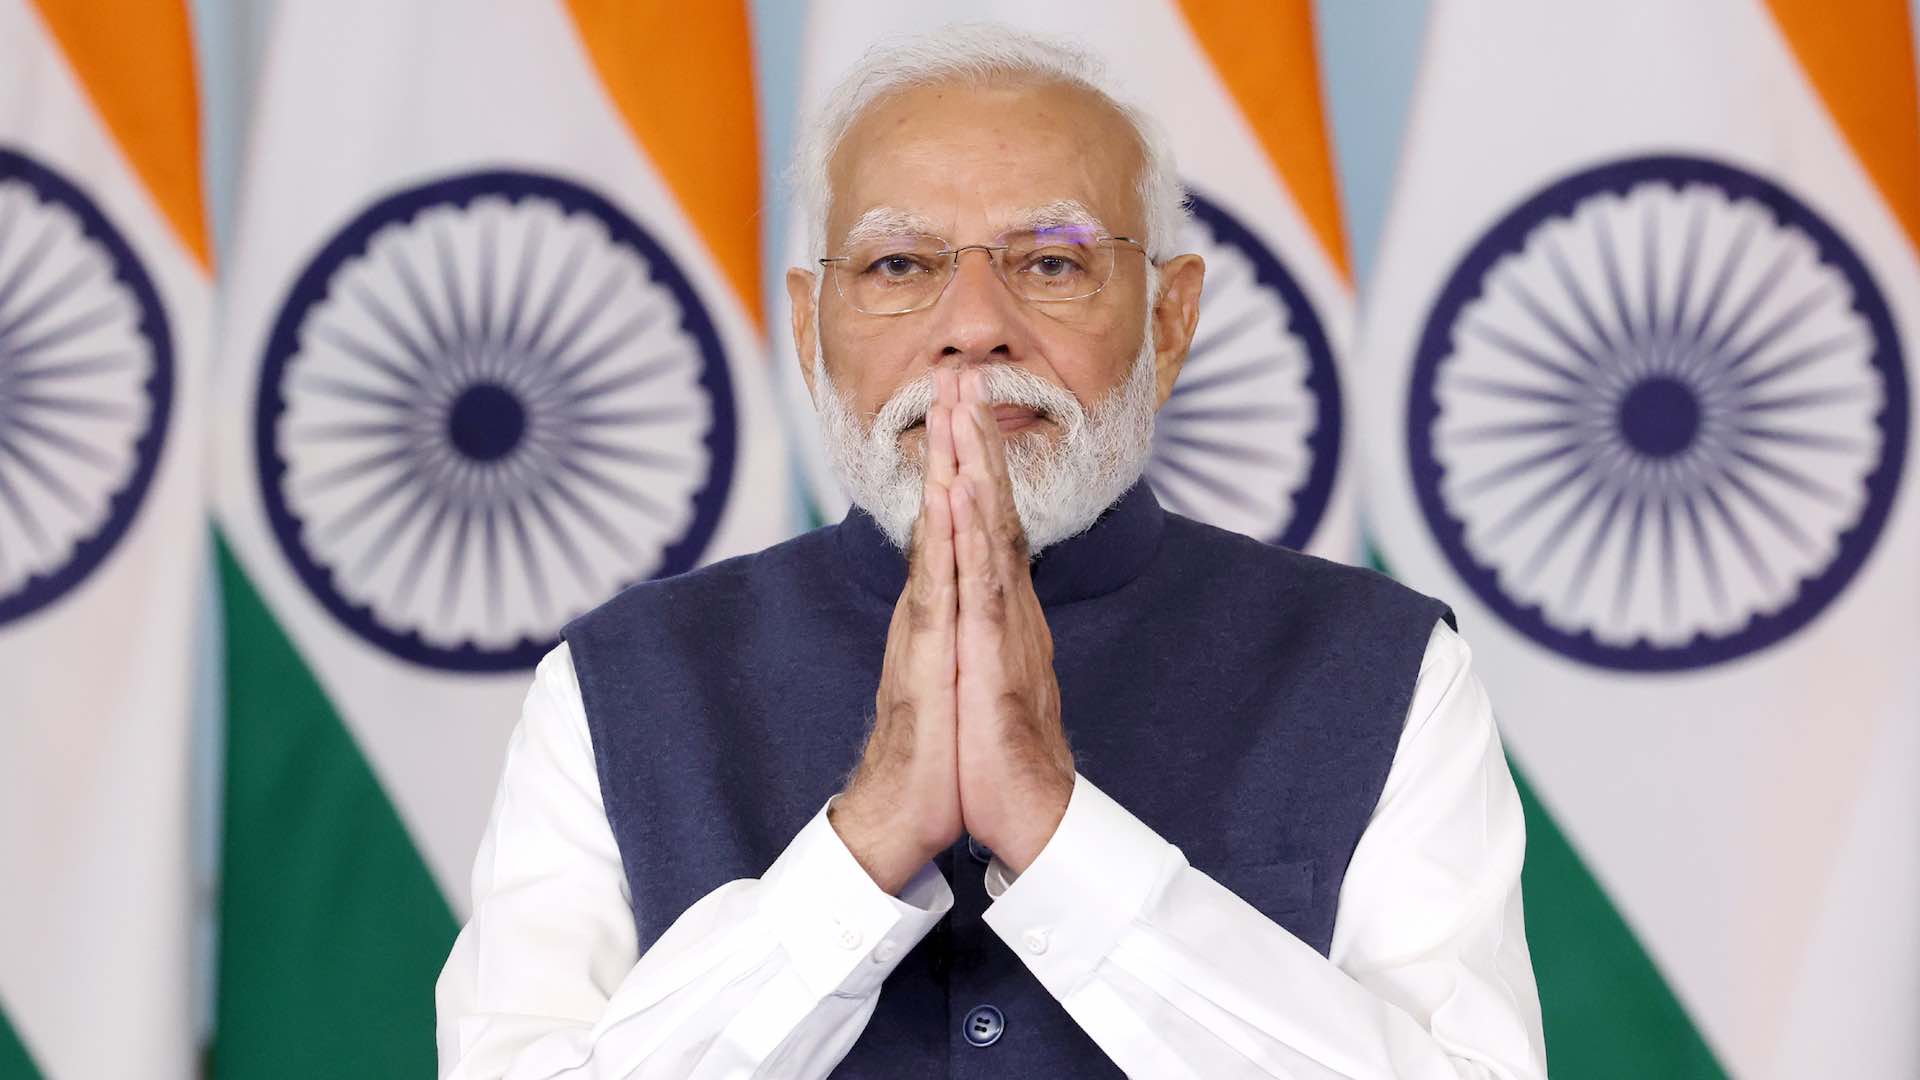 Modi's win reflects India's confidence in his leadership and vision